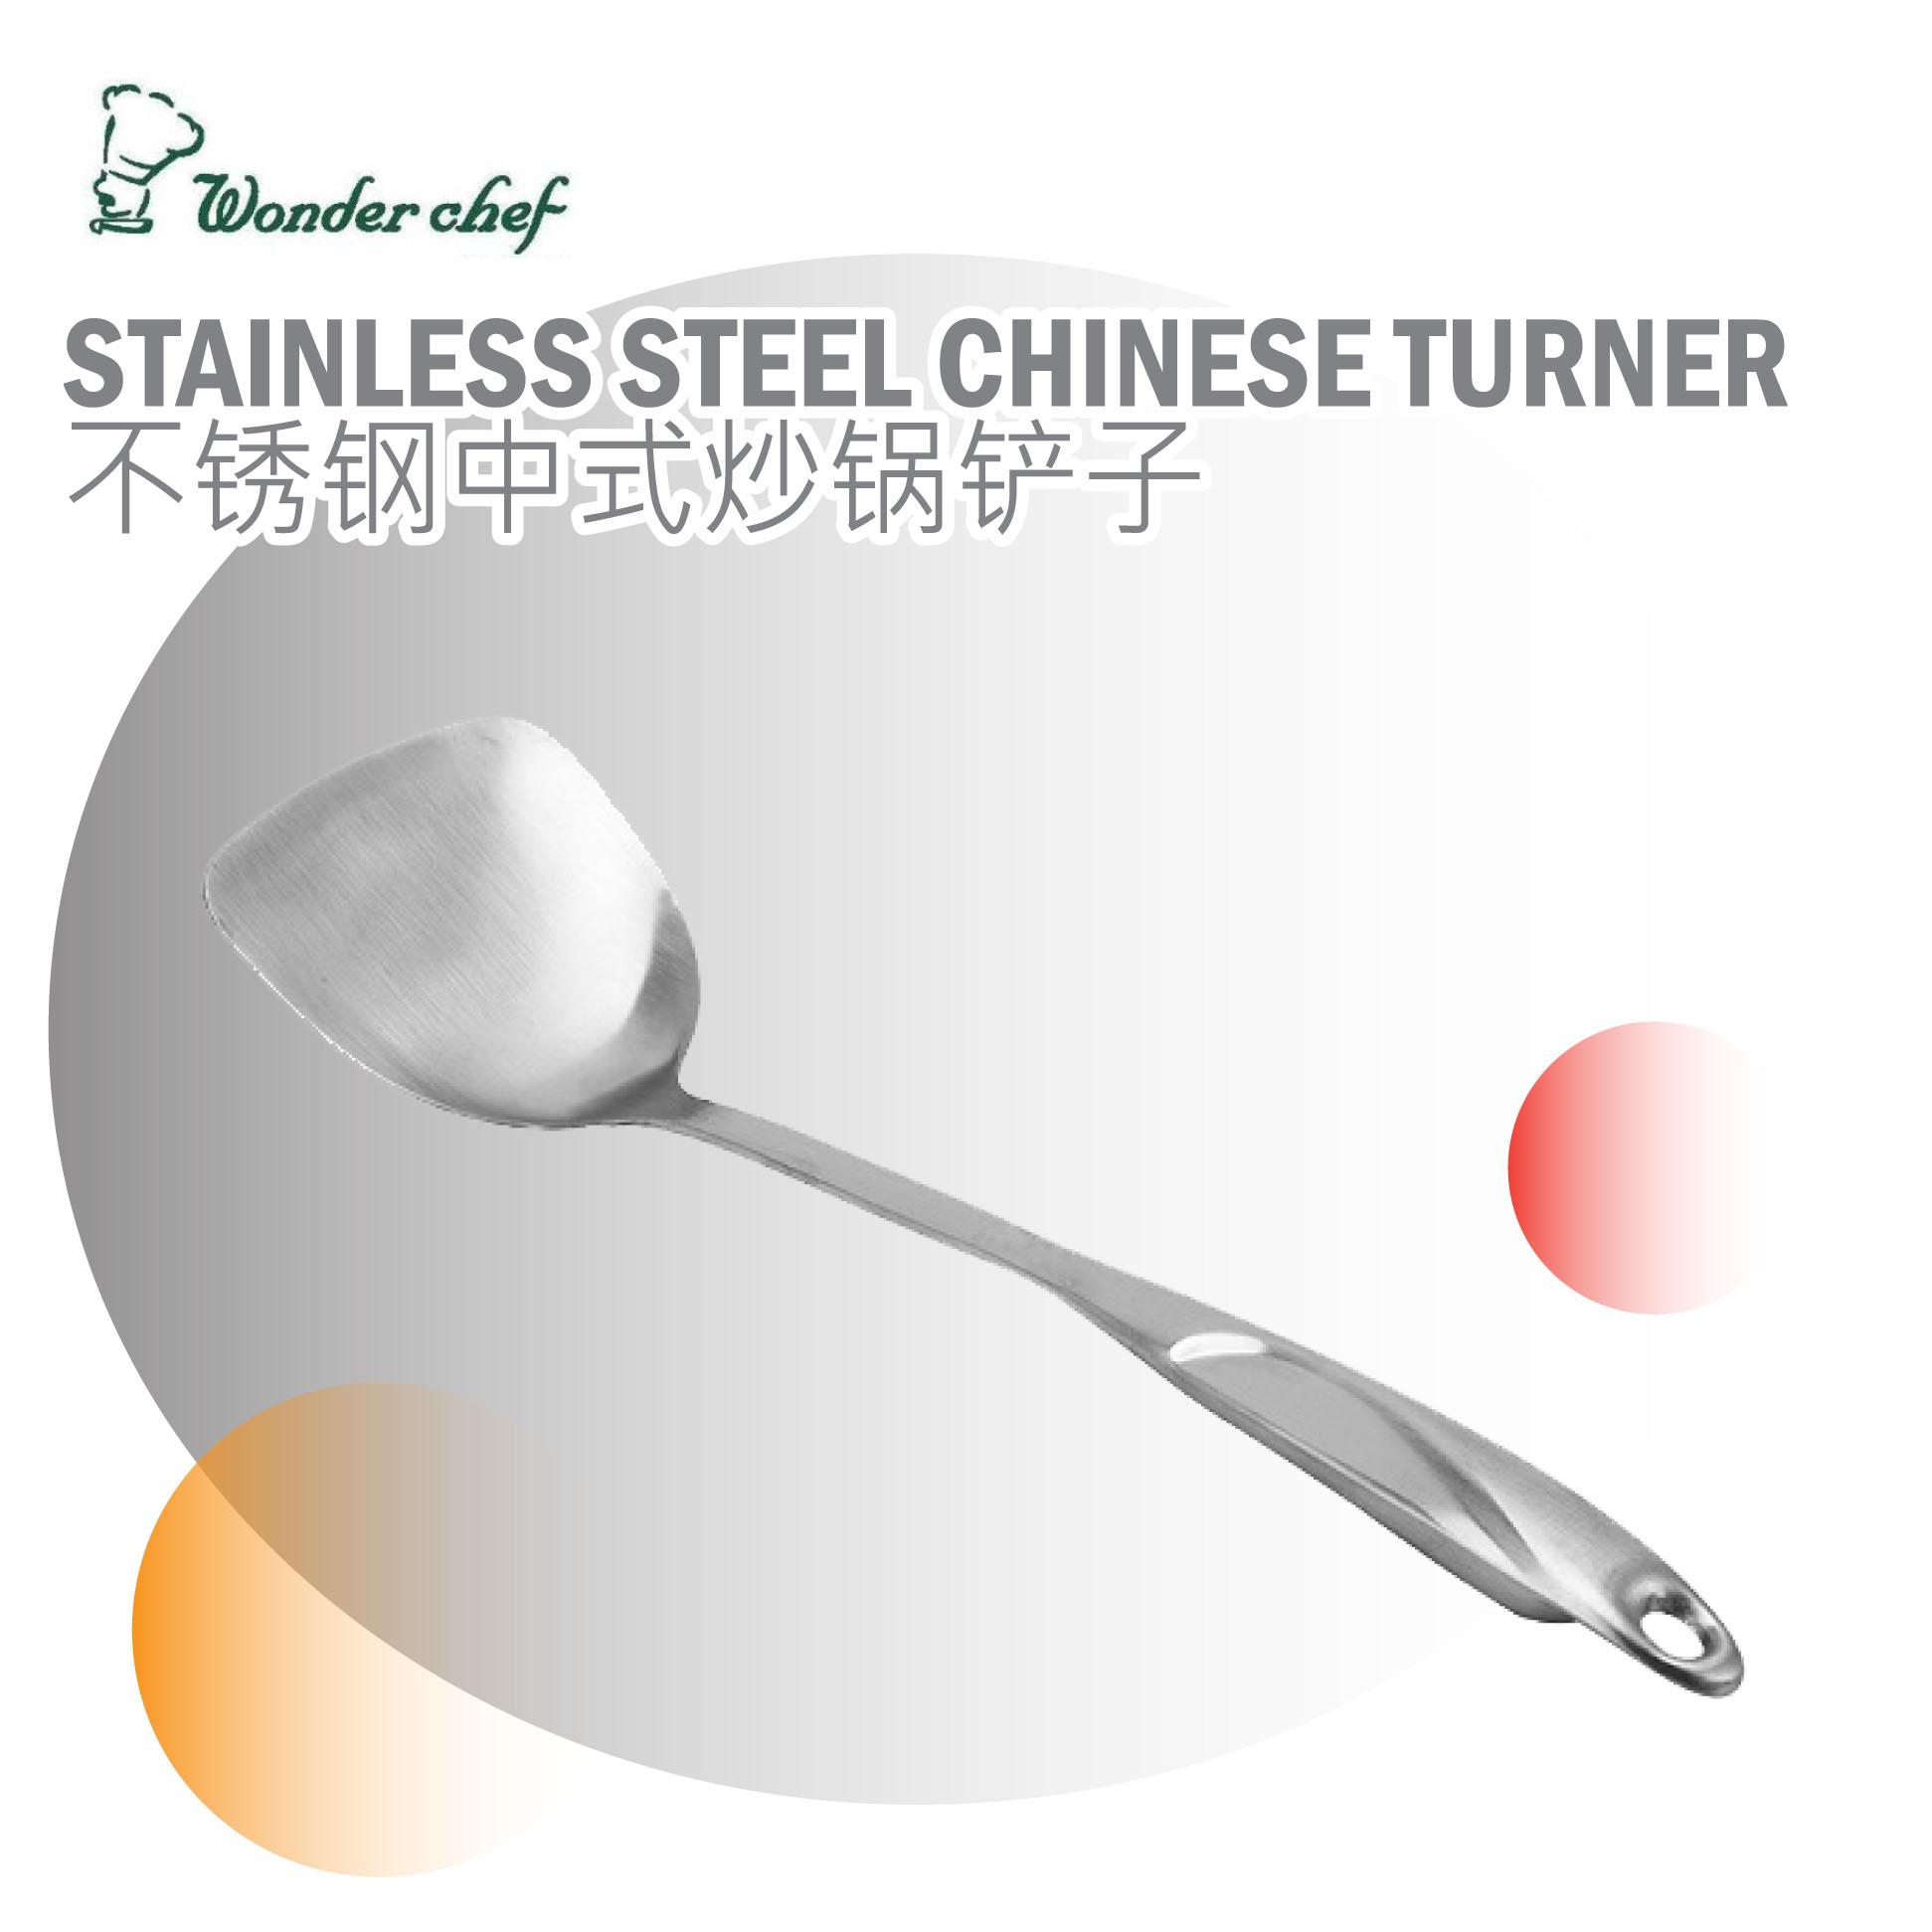 Stainless Steel Chinese Turner/&#19981;&#38152;&#38050;&#20013;&#24335;&#28818;&#38149;&#38130;&#23376;